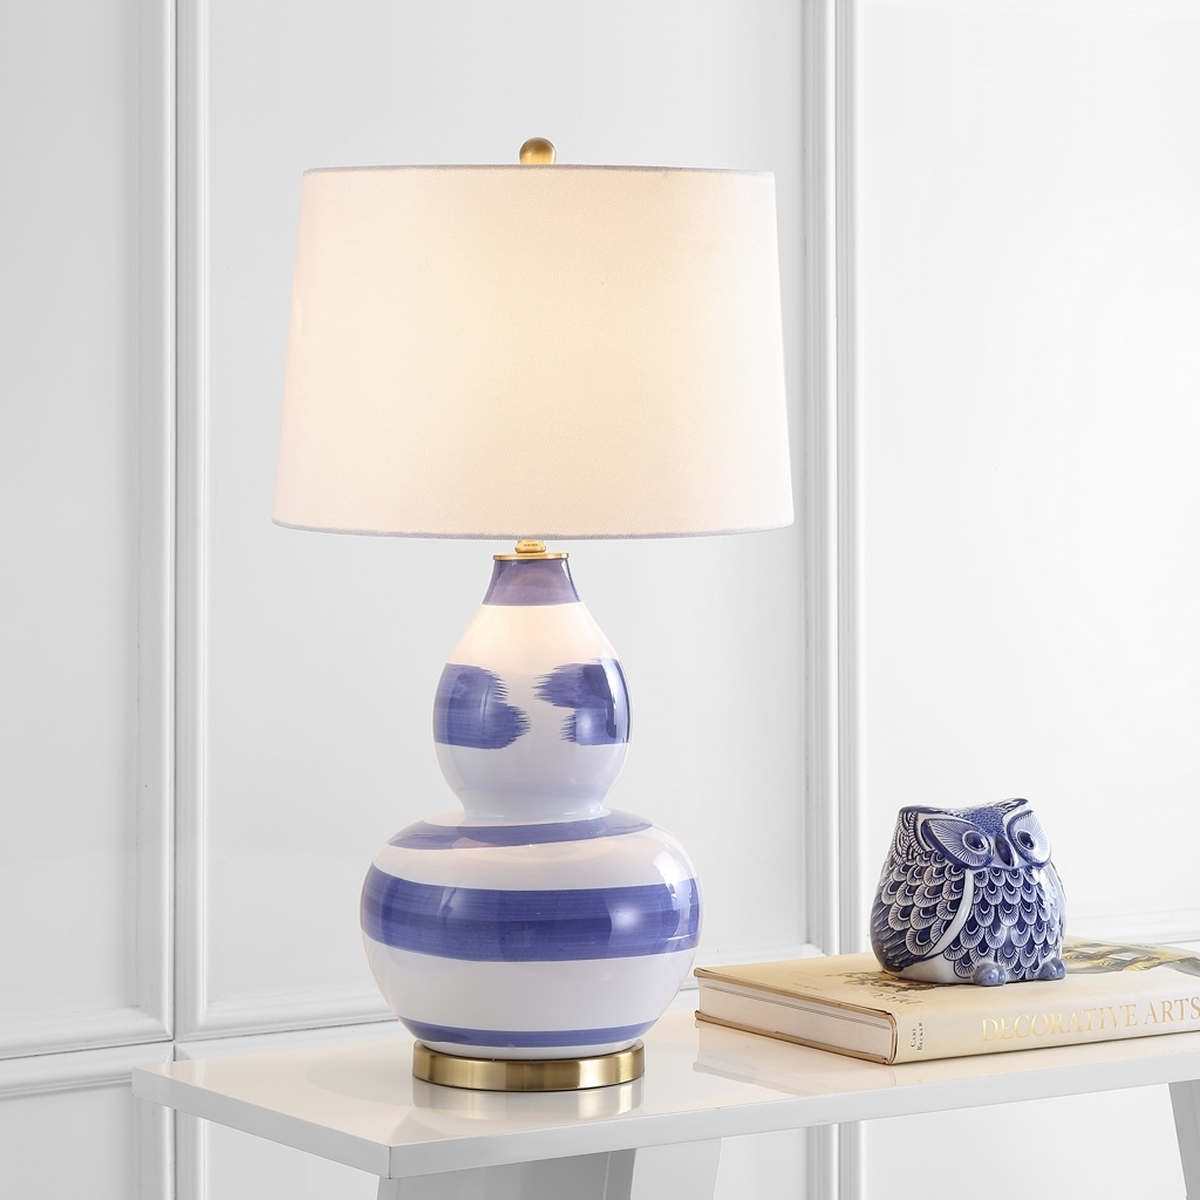 Aileen Table Lamp - Blue/White - Arlo Home - Image 1